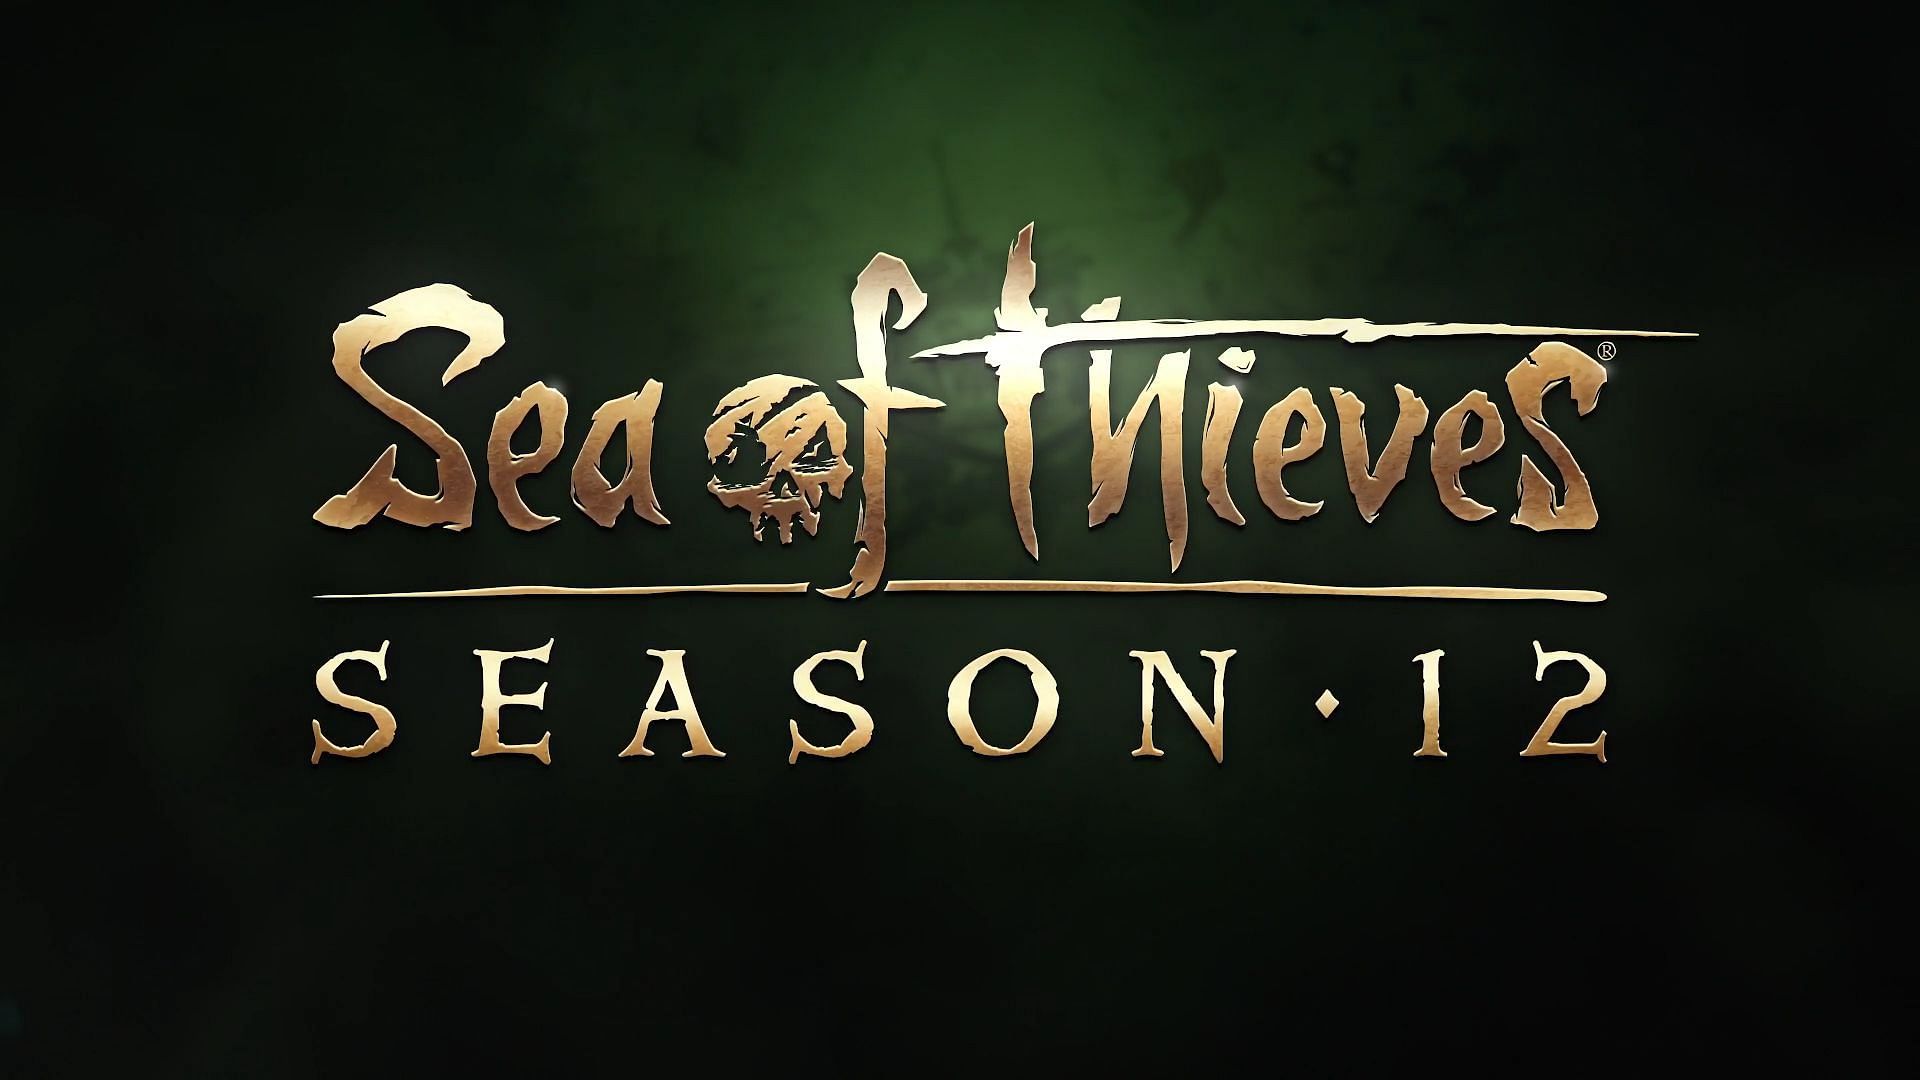 Sea of Thieves 2024 Preview Event revealed new weapons and tools for Season 12.